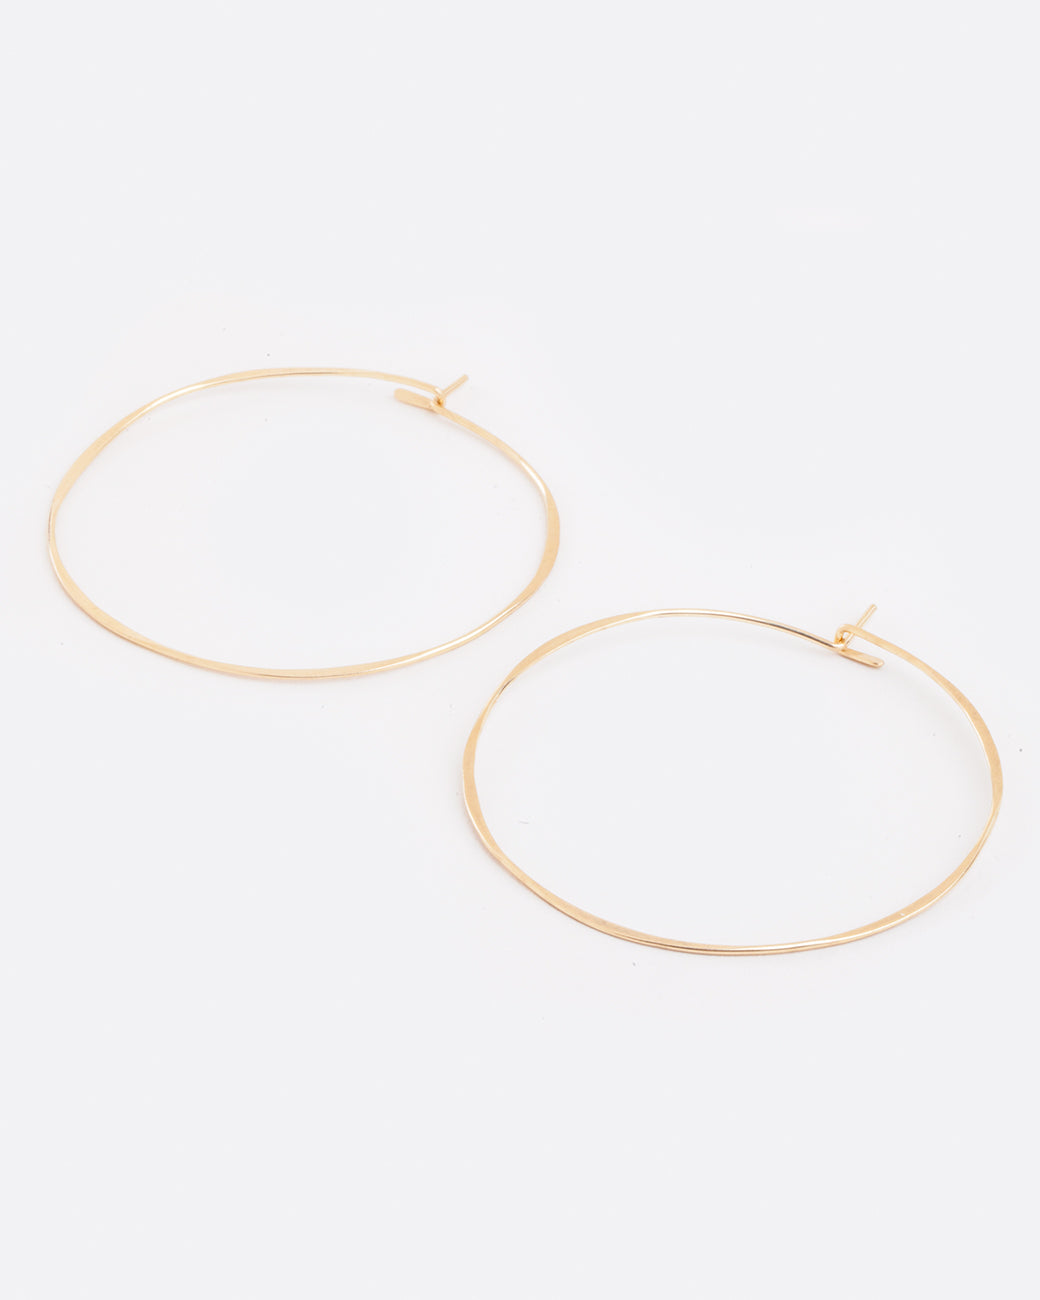 Fairmined gold, hand-hammered, large round hoop earrings that close upon themselves.